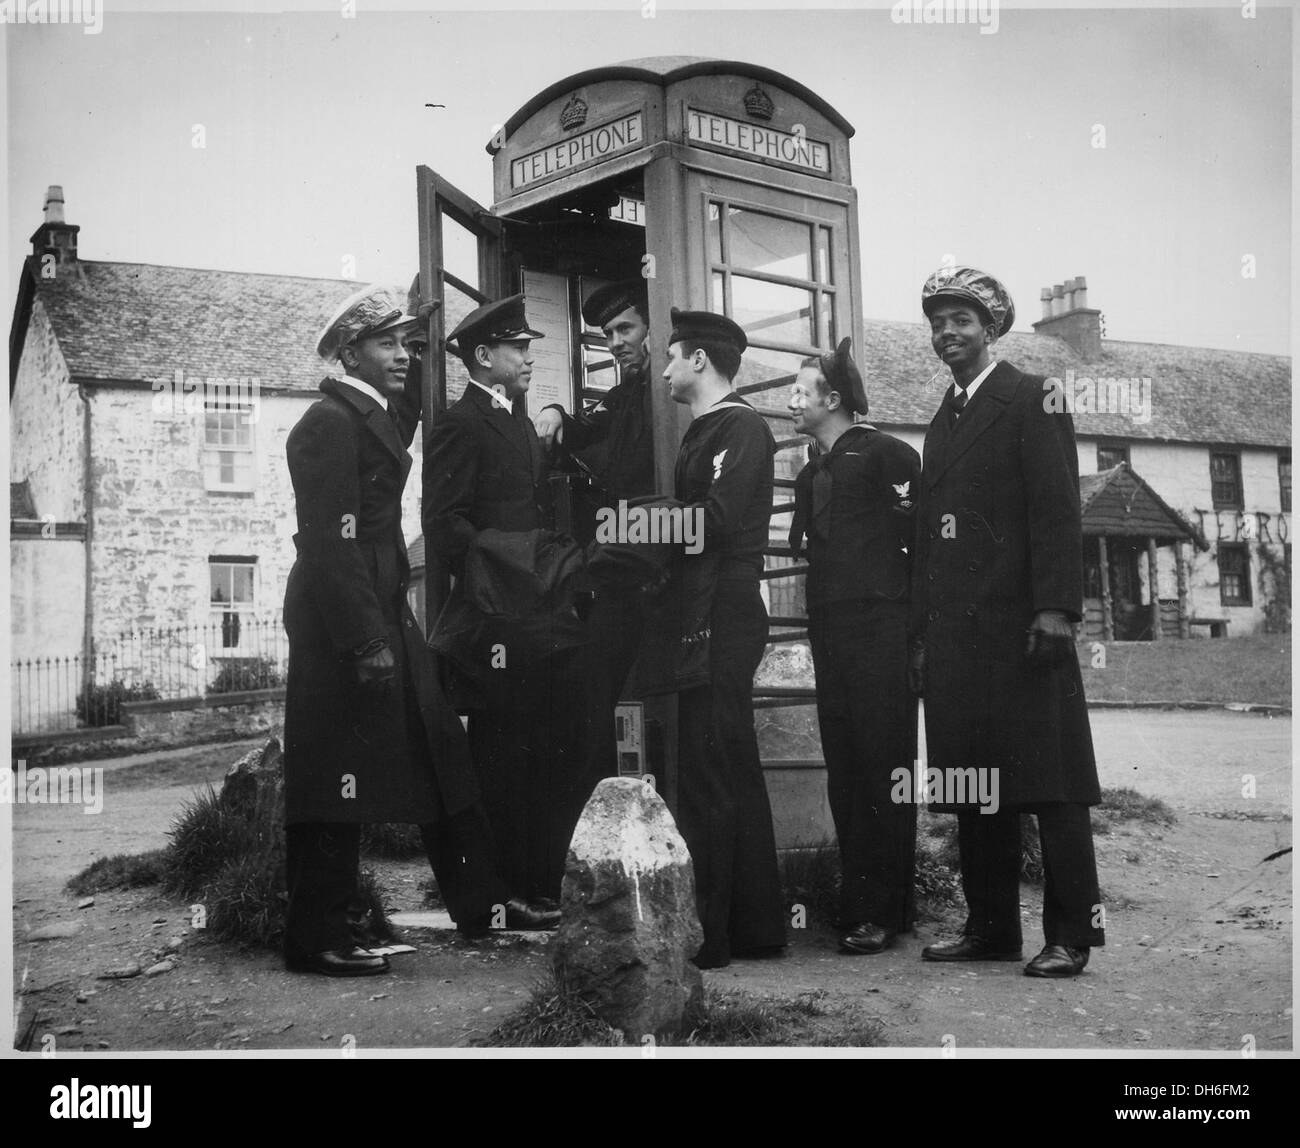 U.S. Coast Guardsmen make use of a telephone booth in Scotland. They are on liberty from their ship, a Coast Guard 513167 Stock Photo